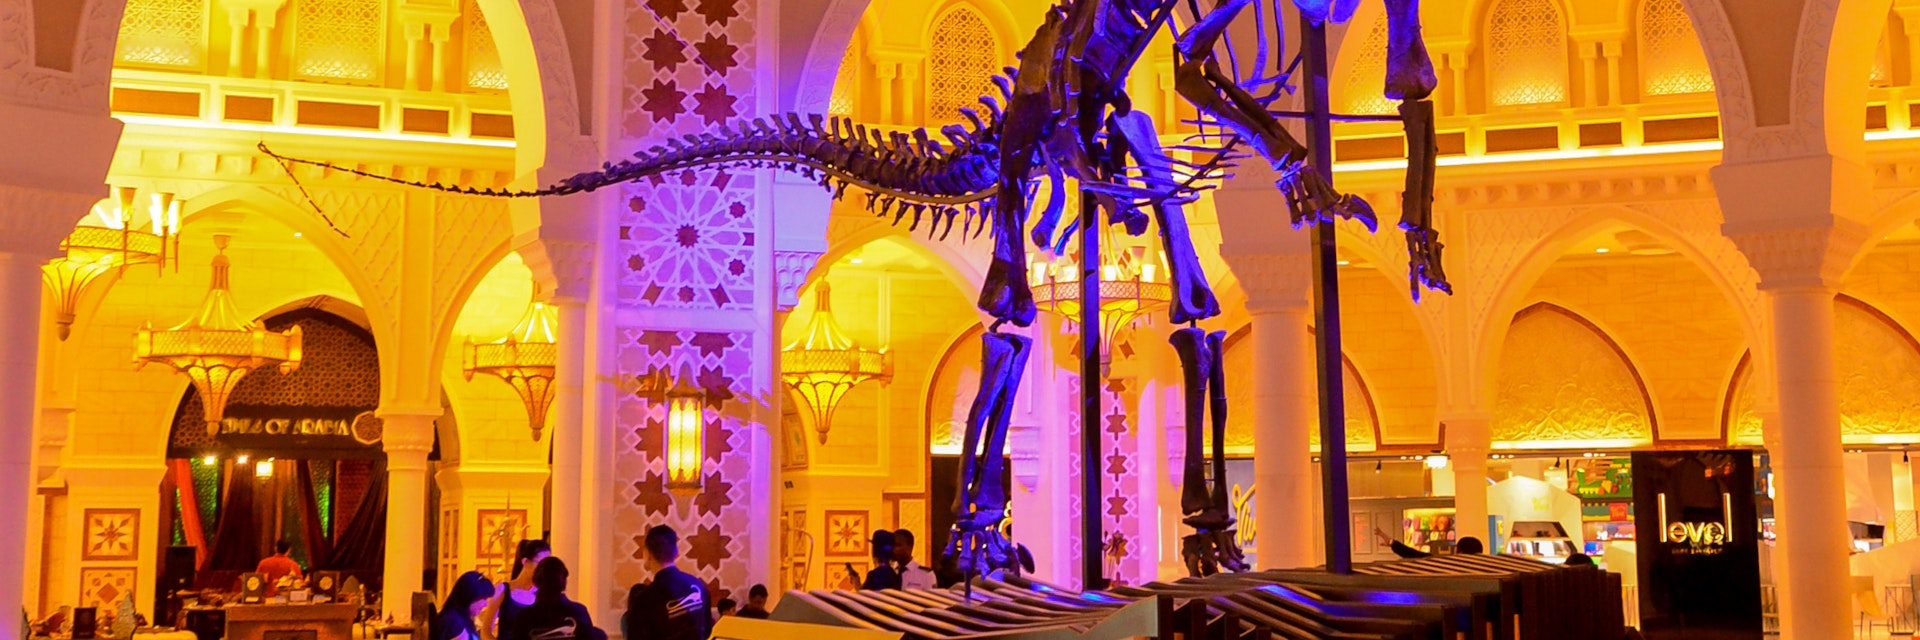 Dinosaur Skeleton in Dubai Mall, Dubai Downtown, United Arab Emirates, UAE, 6th May 2015; Shutterstock ID 646770508; Your name (First / Last): Lauren Keith; GL account no.: 65050; Netsuite department name: Online Editorial; Full Product or Project name including edition: Authentic Dubai Article